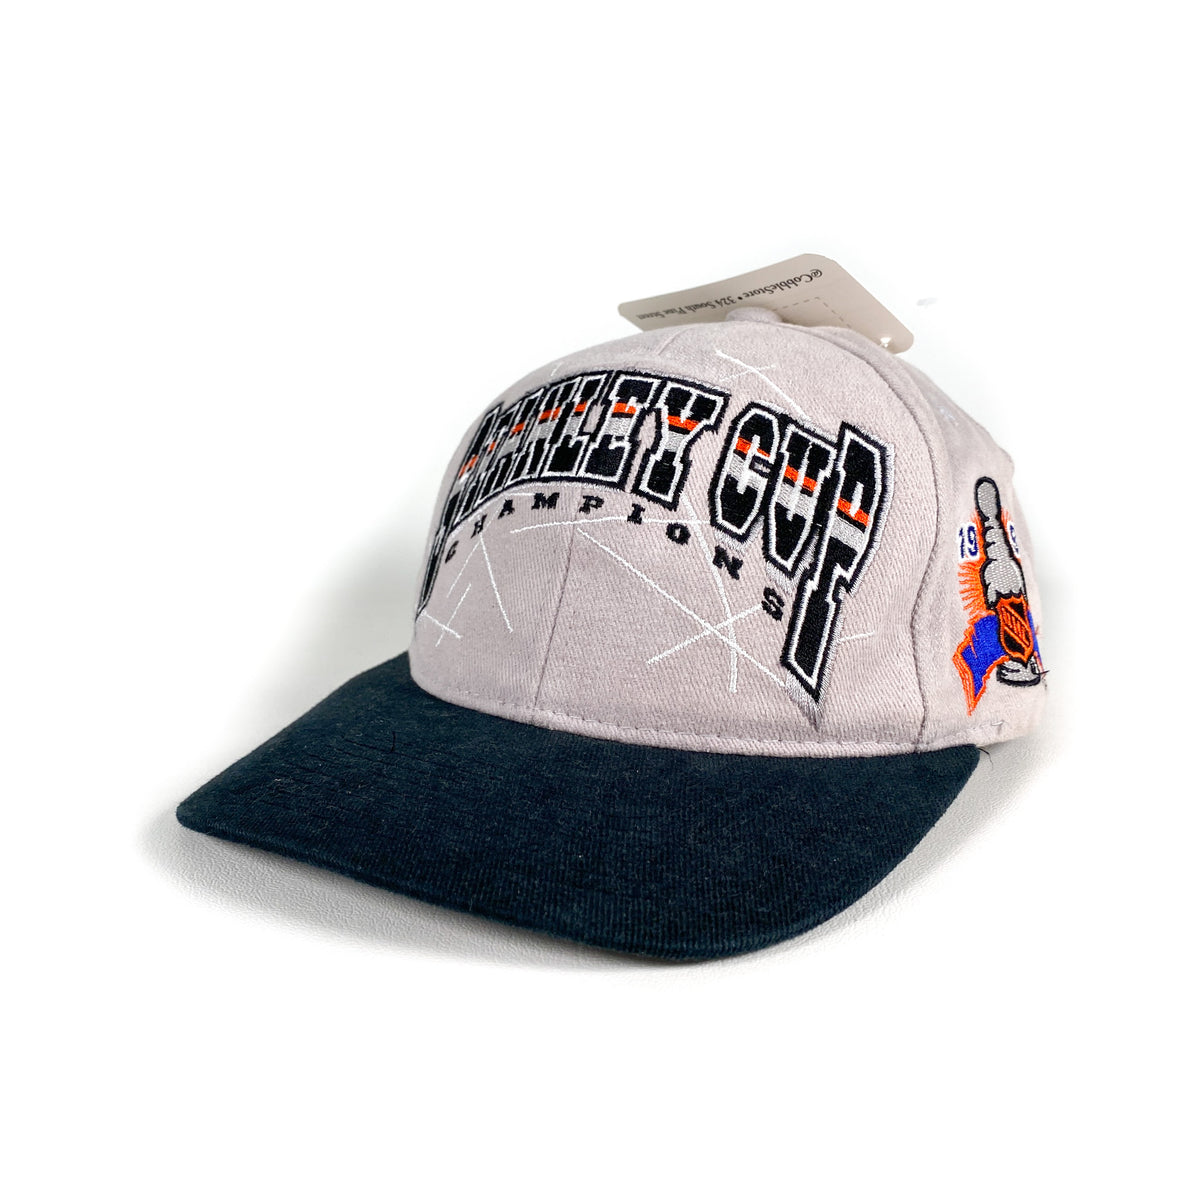 Starter Stanley Cup NHL Champions 1995 Hat - clothing